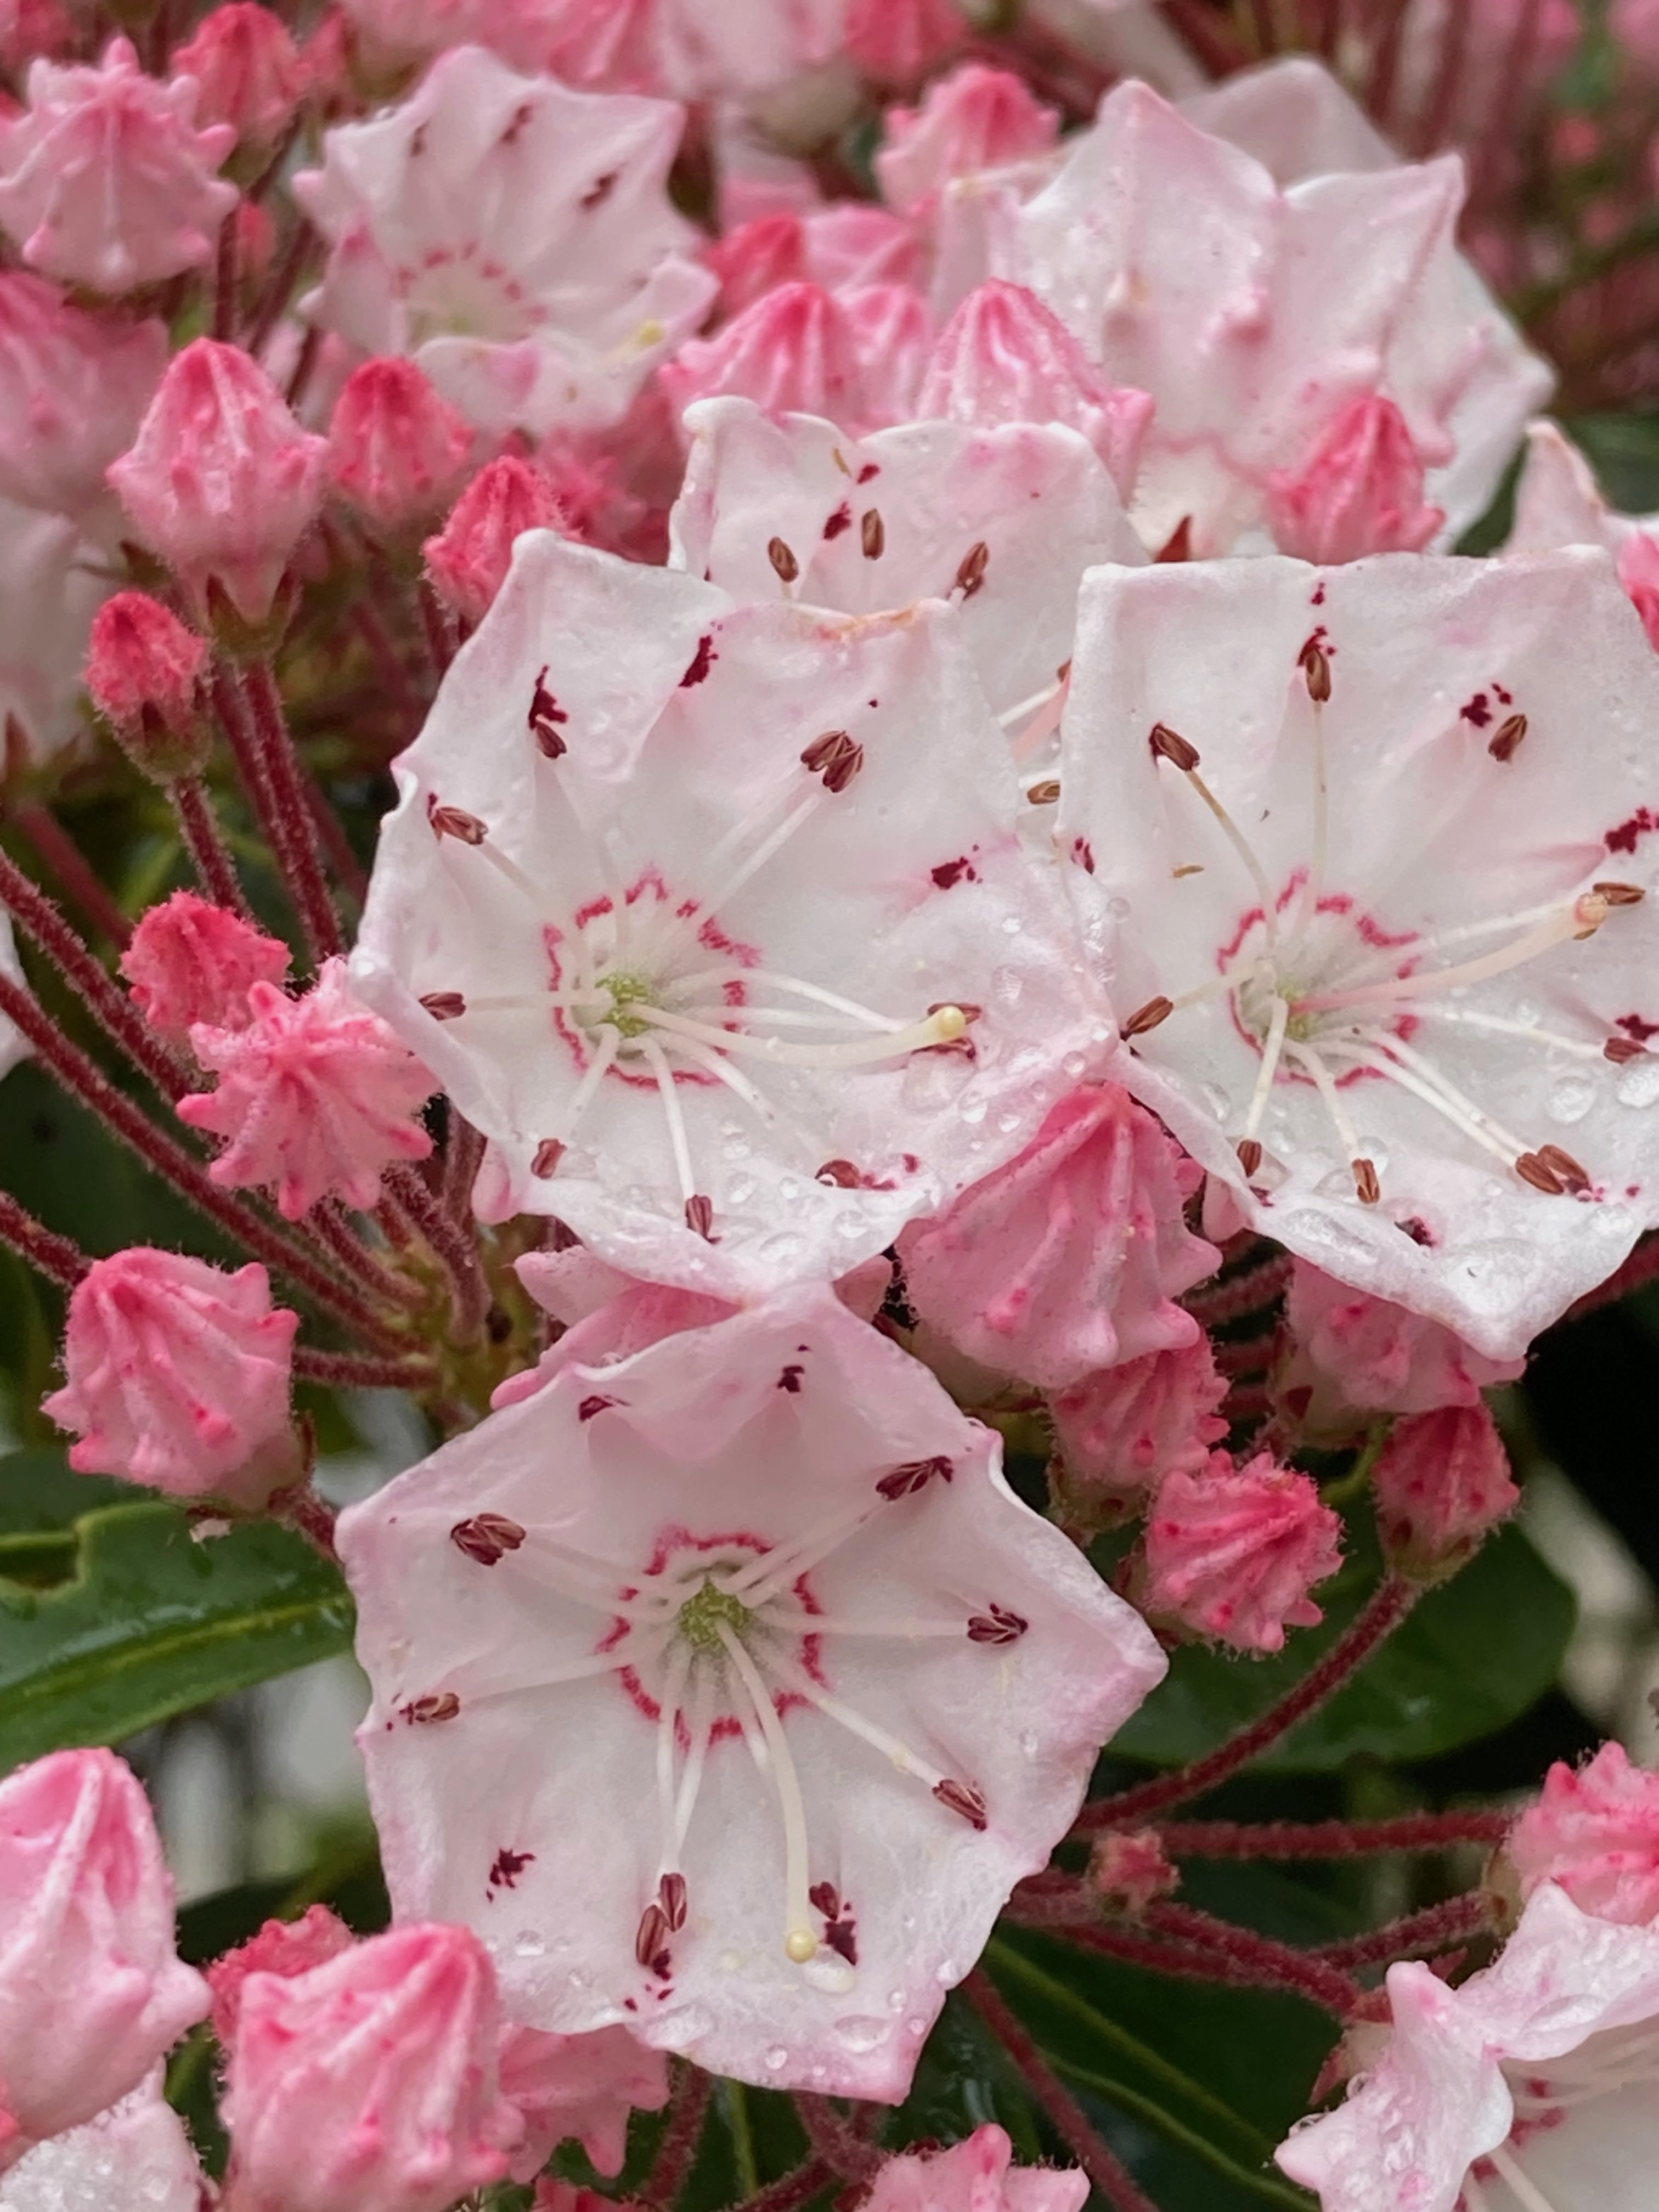 The Scientific Name is Kalmia latifolia. You will likely hear them called Mountain Laurel, Ivy, Calico-bush. This picture shows the The cup-shaped corolla has folds where the 10 anthers are tucked in at first. of Kalmia latifolia